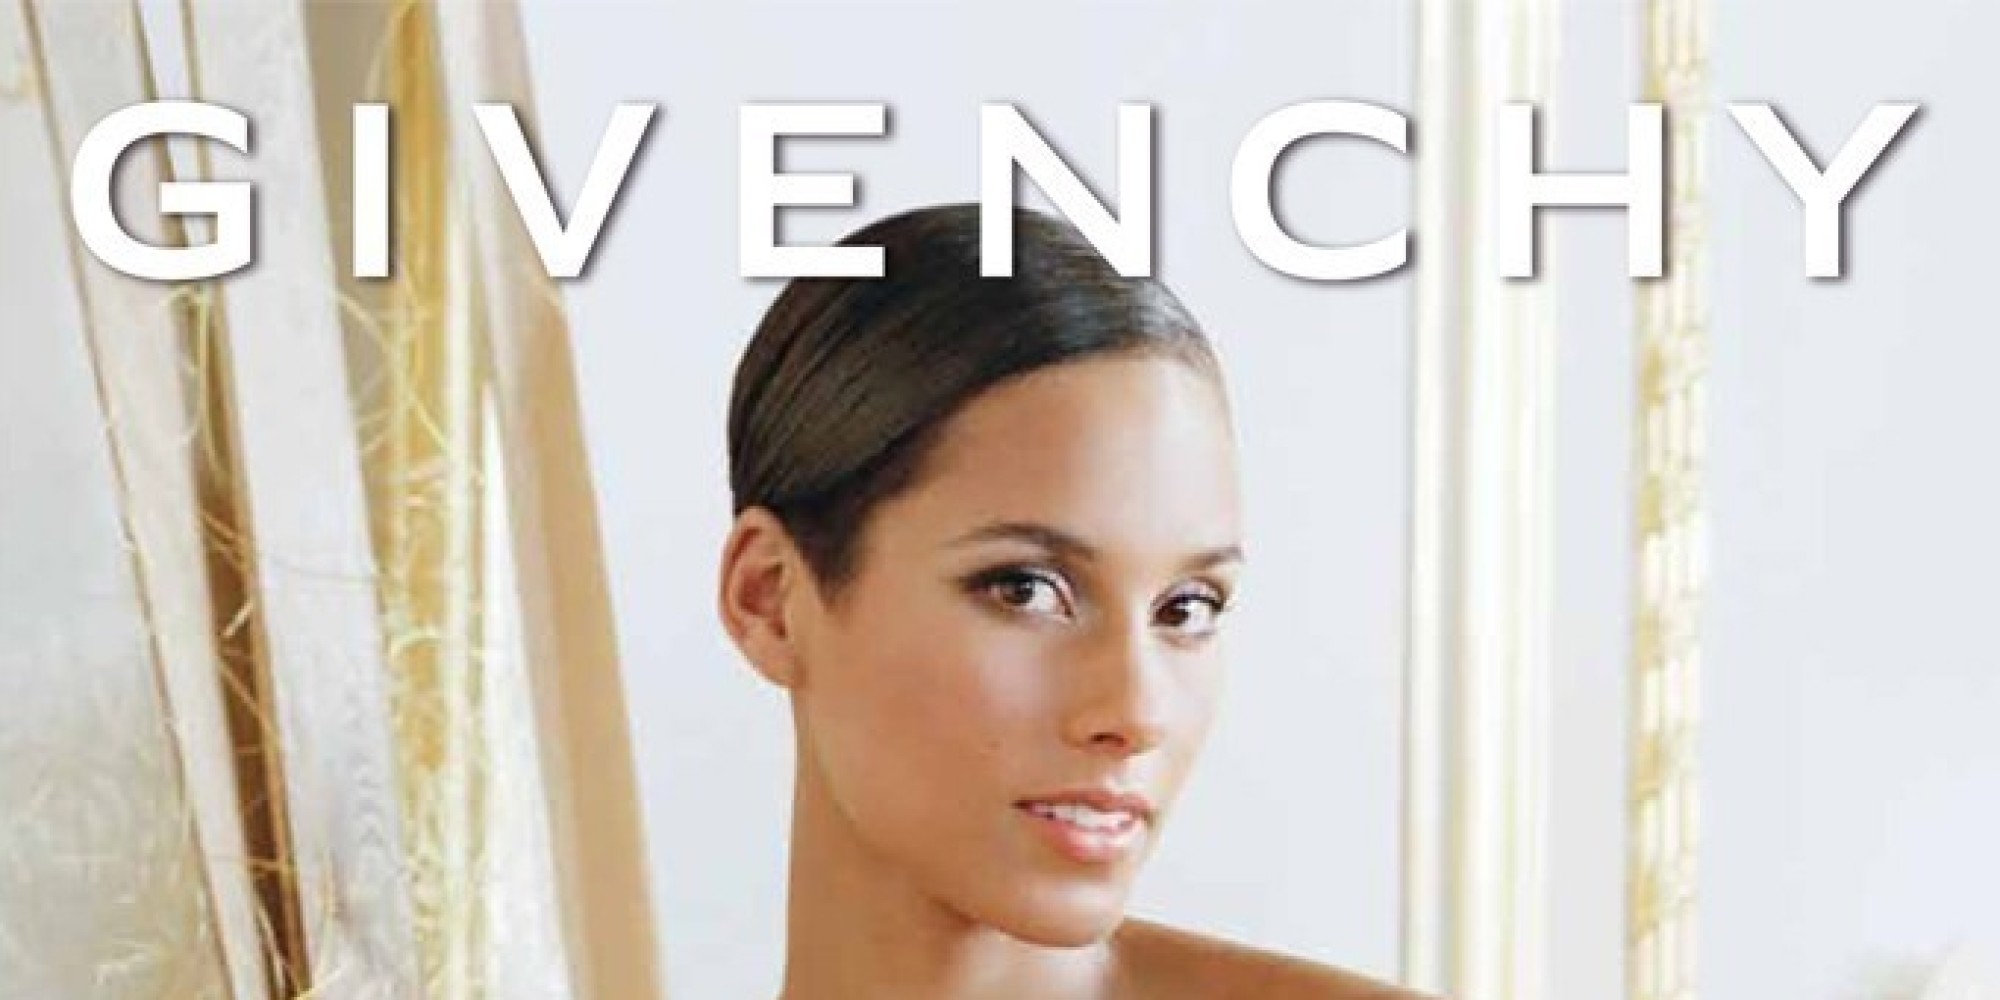 Alicia Keys Givenchy Perfume Campaign Is Super Fab Obvi Huffpost 8860